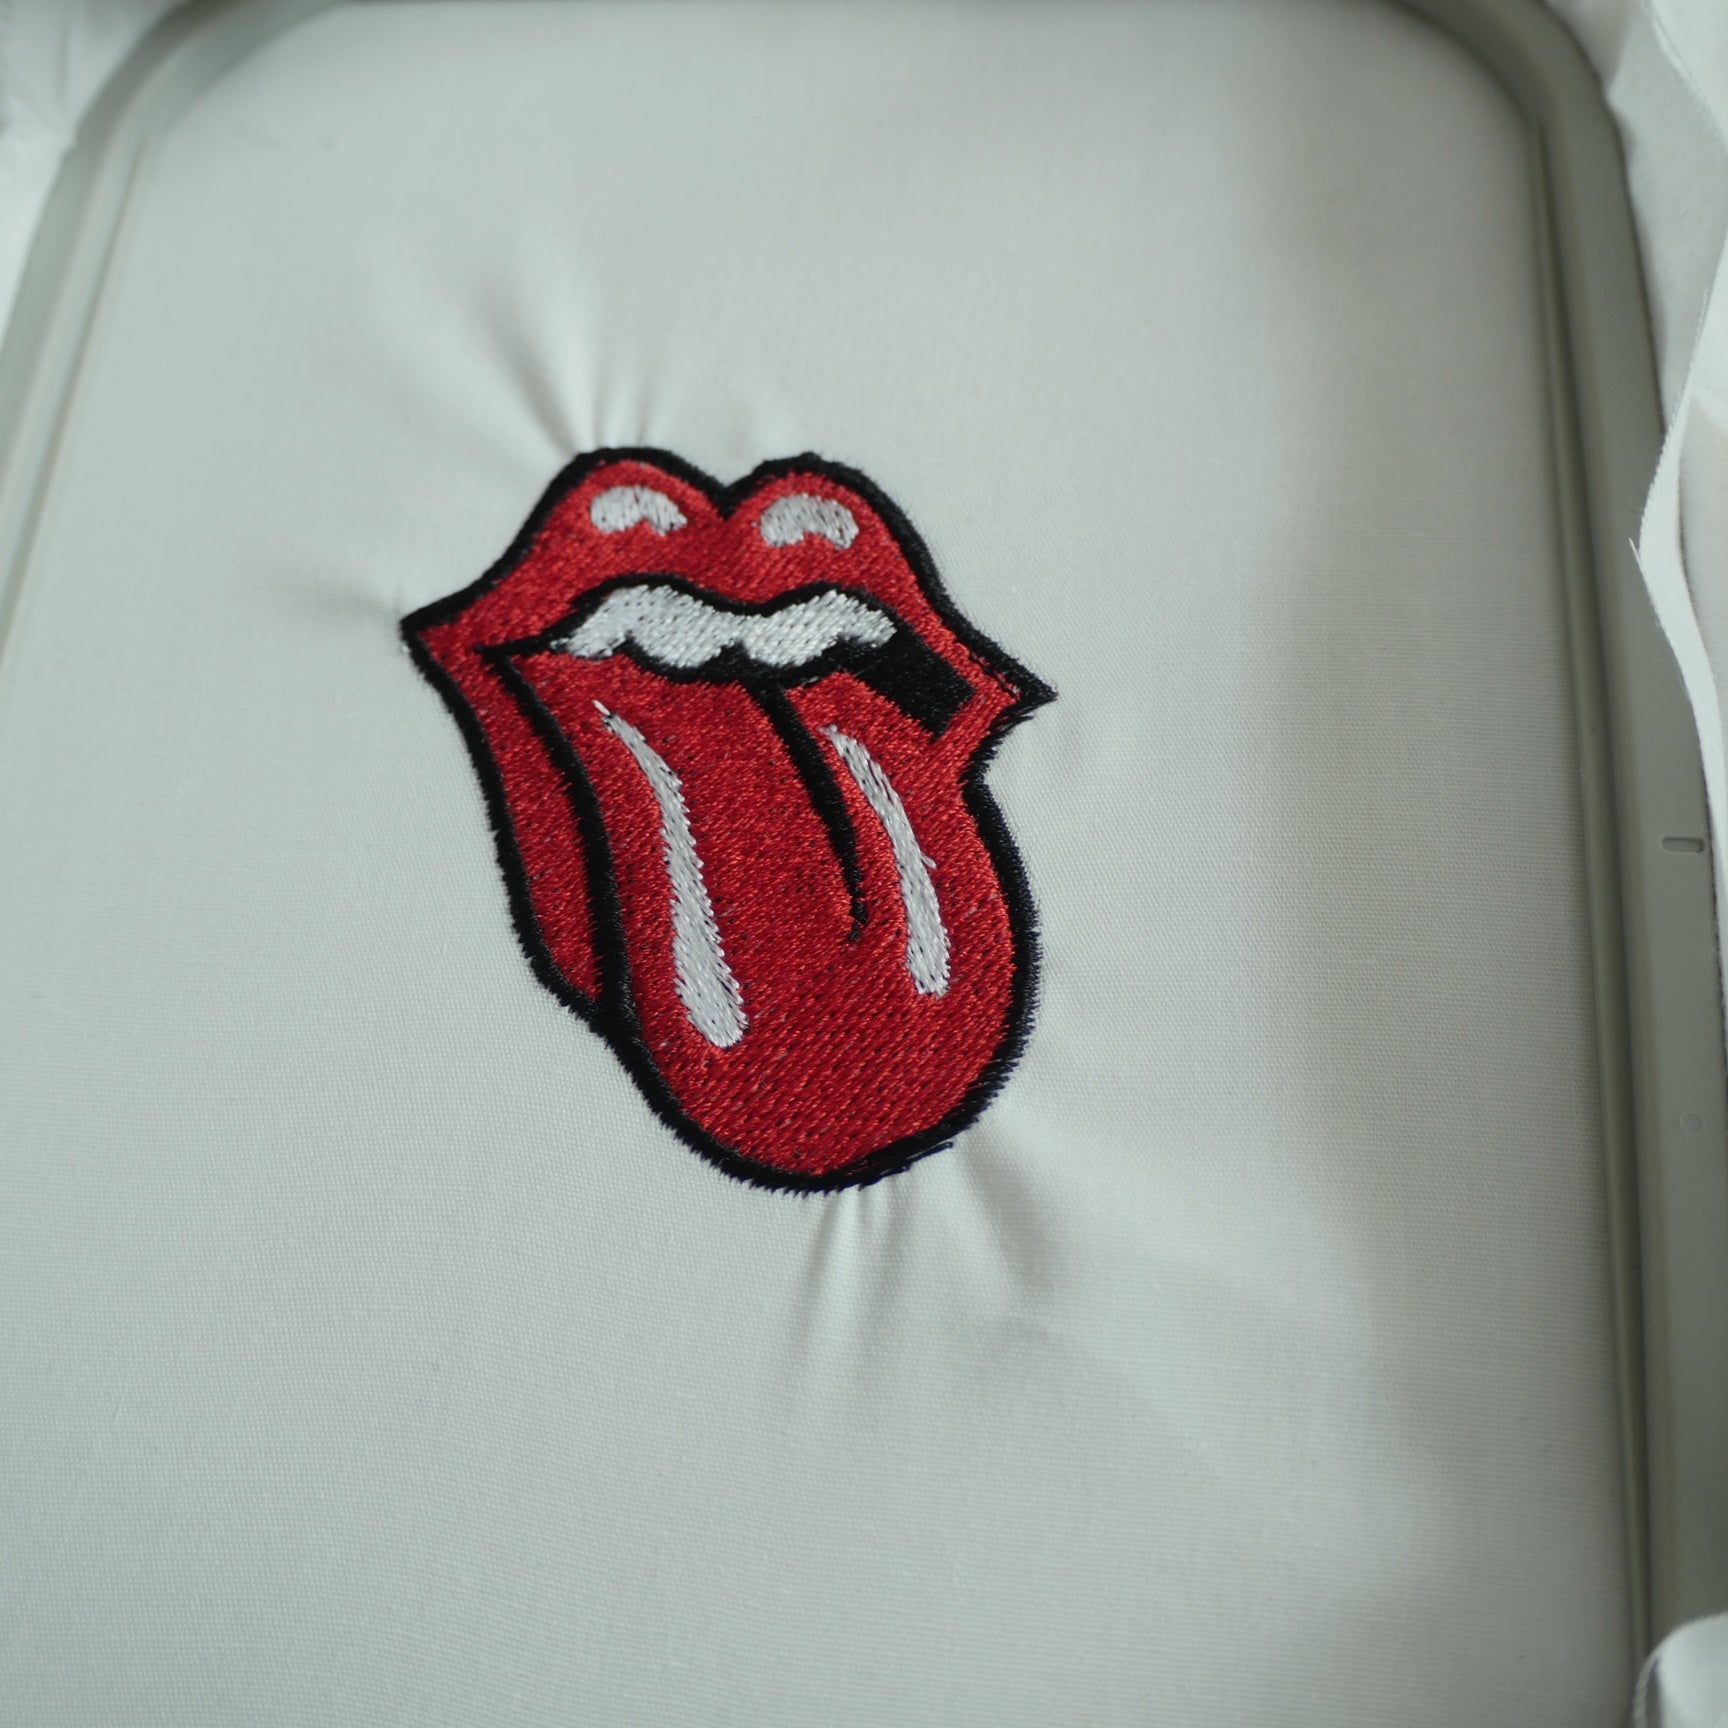 Rolling Stones Lip Embroidery Design